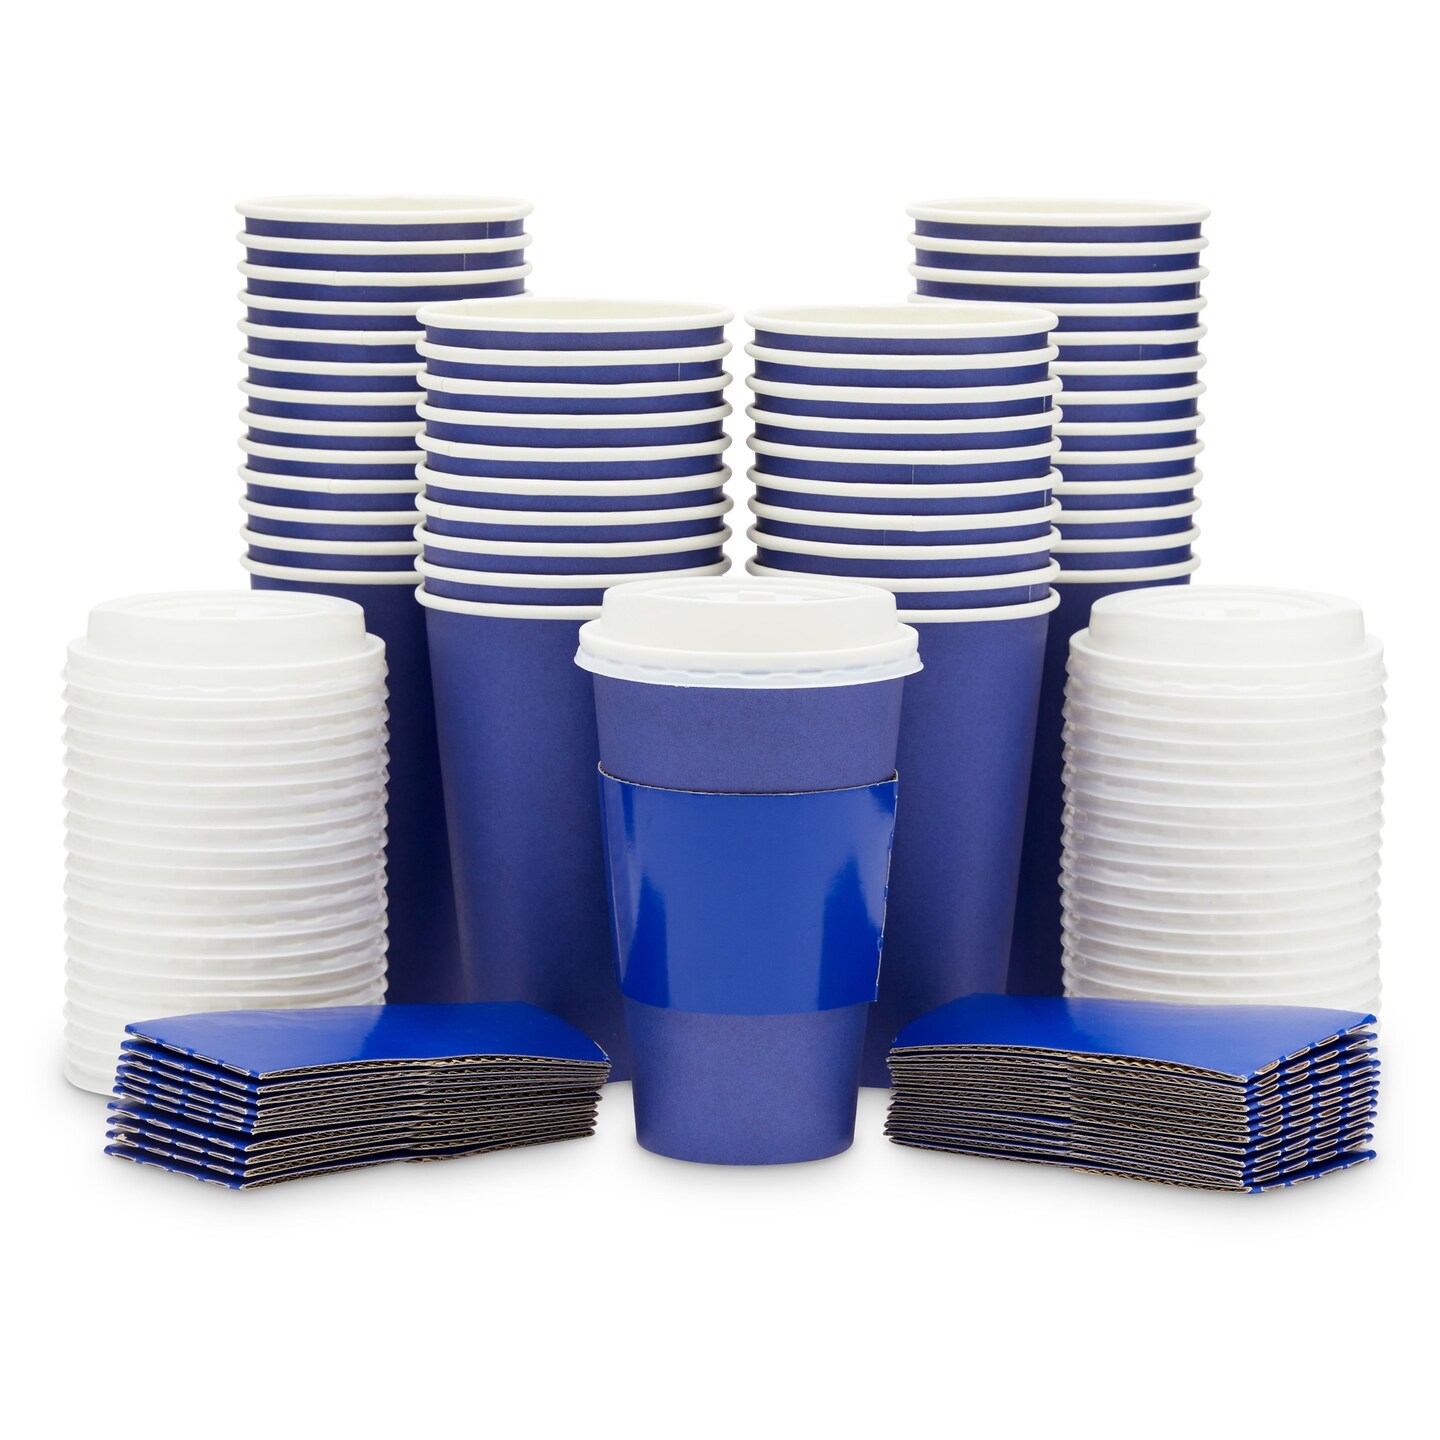  Disposable Coffee Cups With Lids - 16 oz To Go Coffee